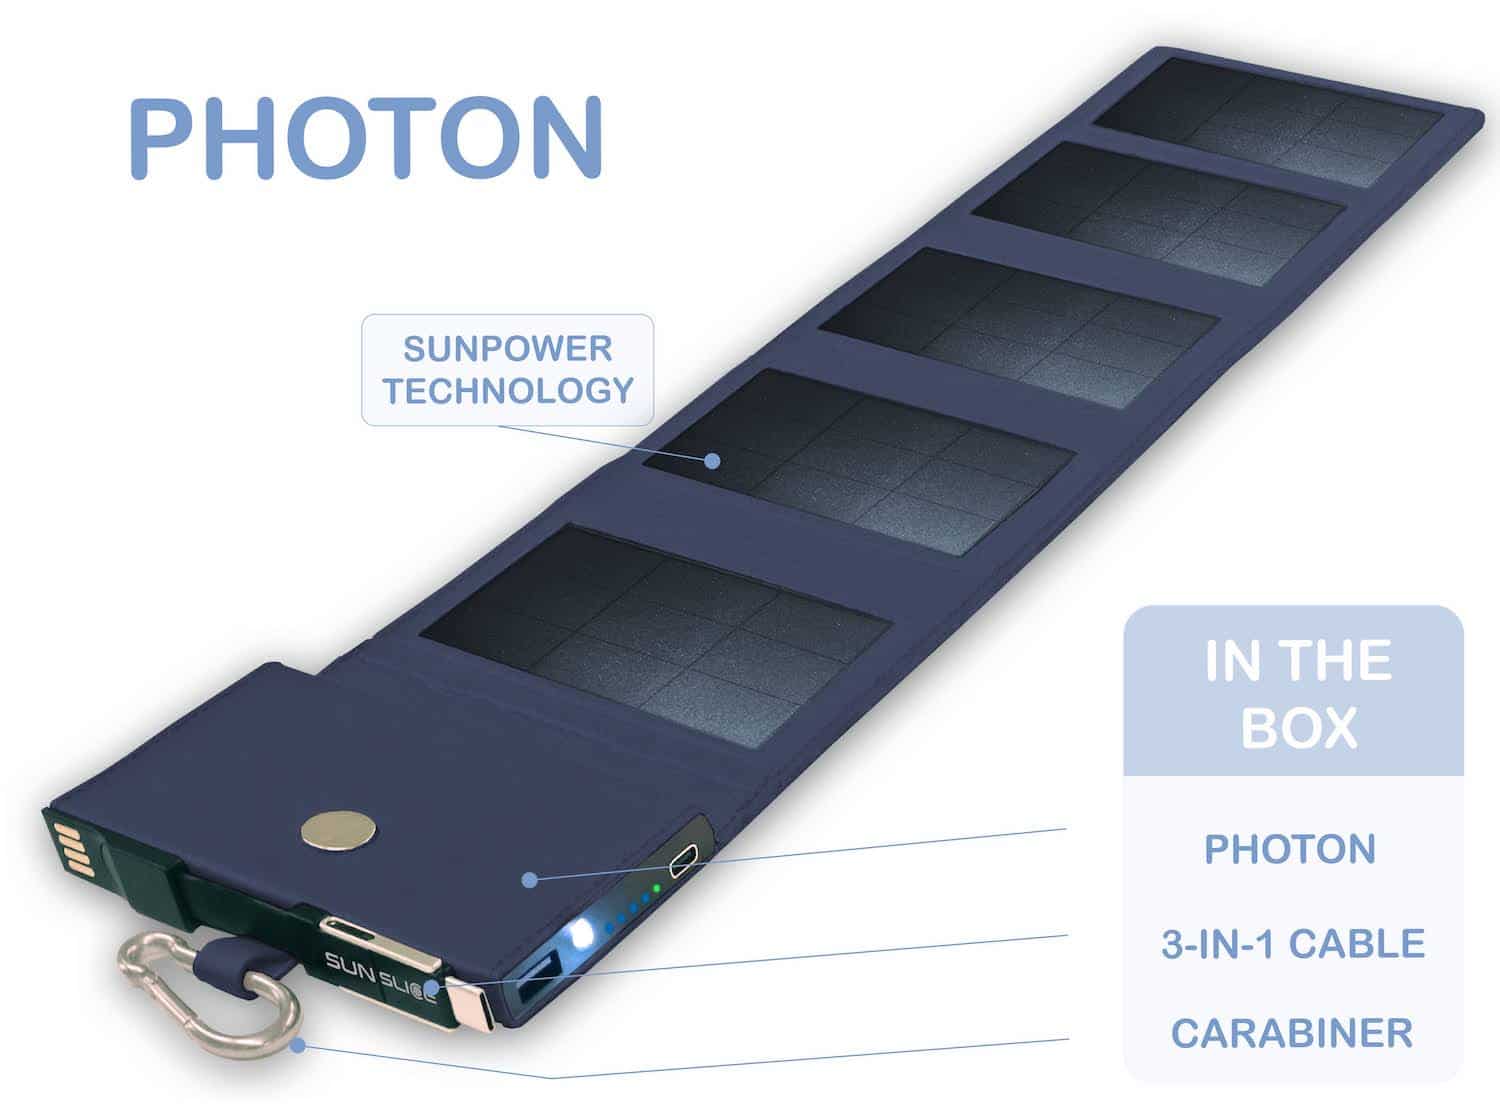 photon blue solar power bank charger on white background with specifications